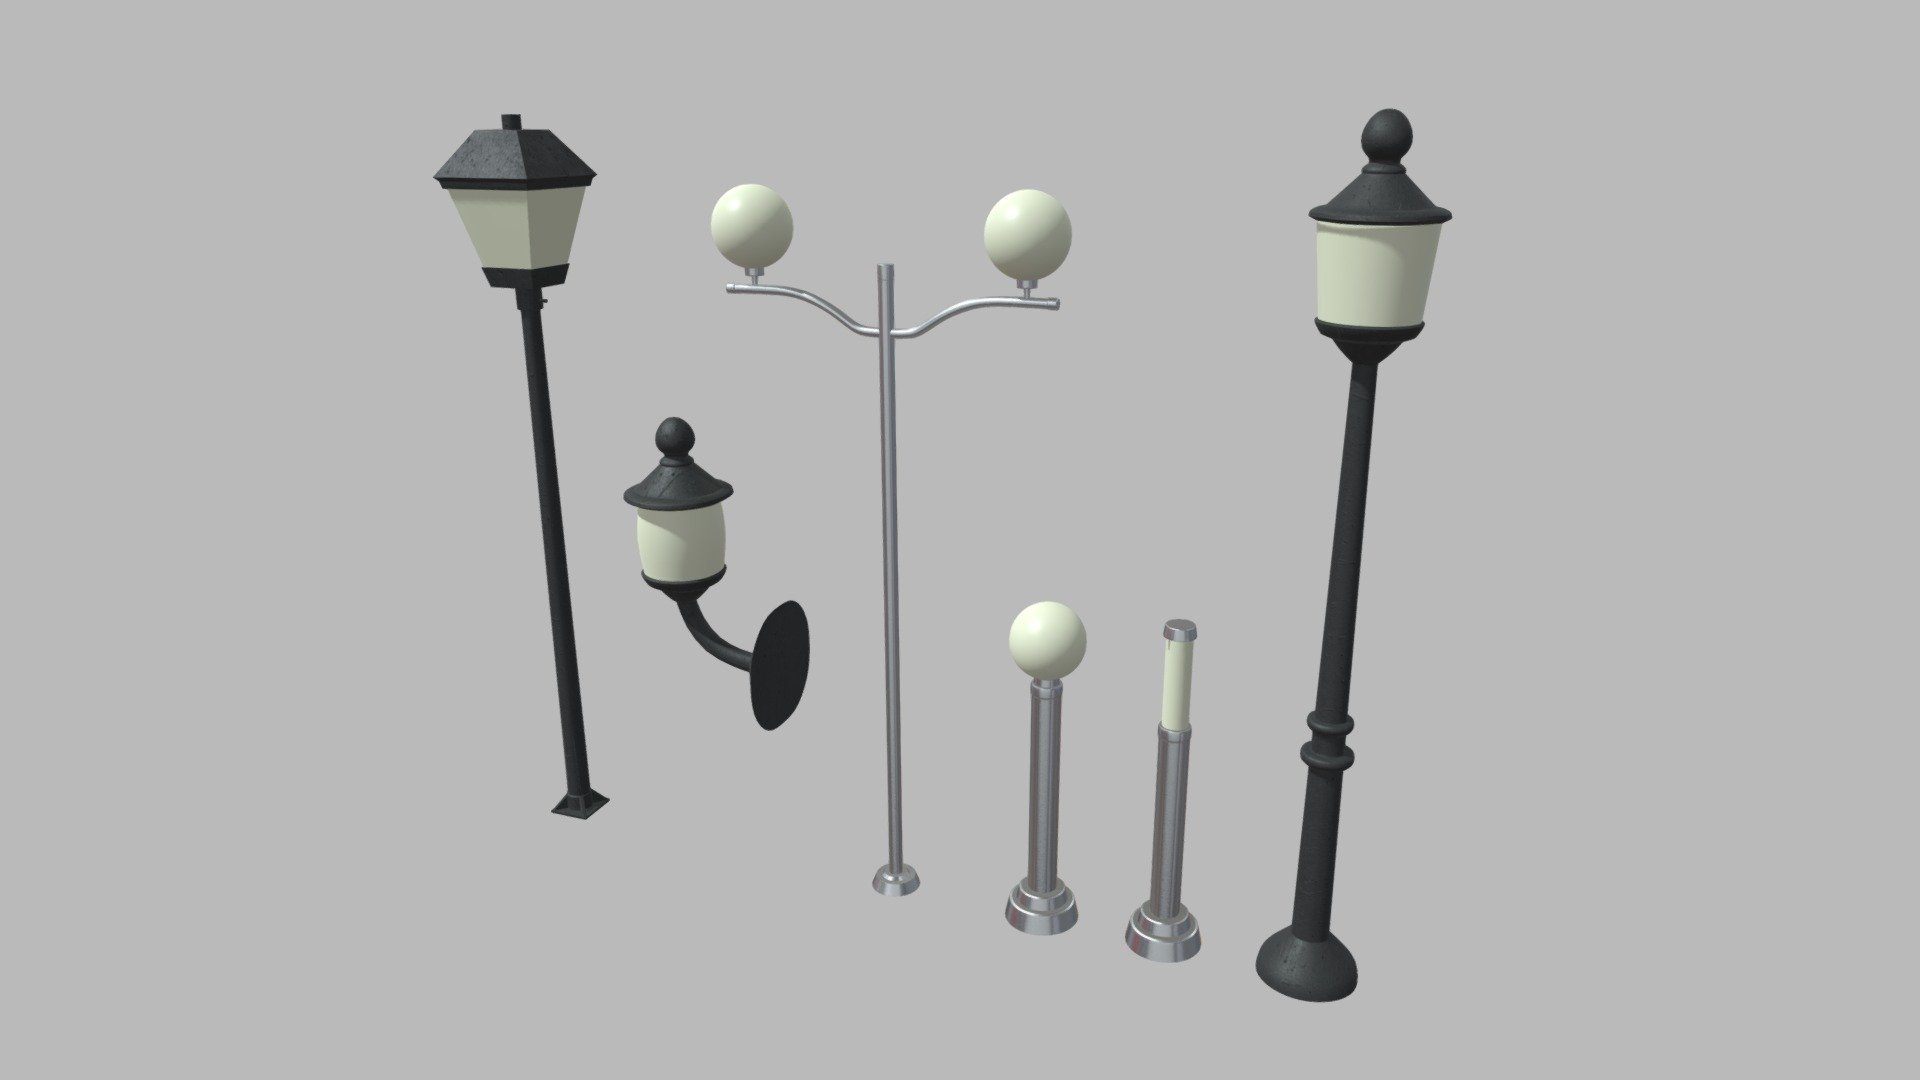 This model contains an Street Lights 01 02 03 04 05 06 based on realistic street lights which i modeled in Maya 2018 and texturized in Substance Painter.

The 6 street lights will have textures, fbx, obj, mb, dae, blend and substance file, all in one unique UV.

These models will be part of a huge city elements pack which will be added as a big pack and separately on my profile.

If you need any kind of help contact me, i will help you with everything i can. If you like the model please give me some feedback, I would appreciate it.

Don’t doubt on contacting me, i would be very happy to help. If you experience any kind of difficulties, be sure to contact me and i will help you. Sincerely Yours, ViperJr3D - Street Lights 01 02 03 04 05 06 - Buy Royalty Free 3D model by ViperJr3D 3d model